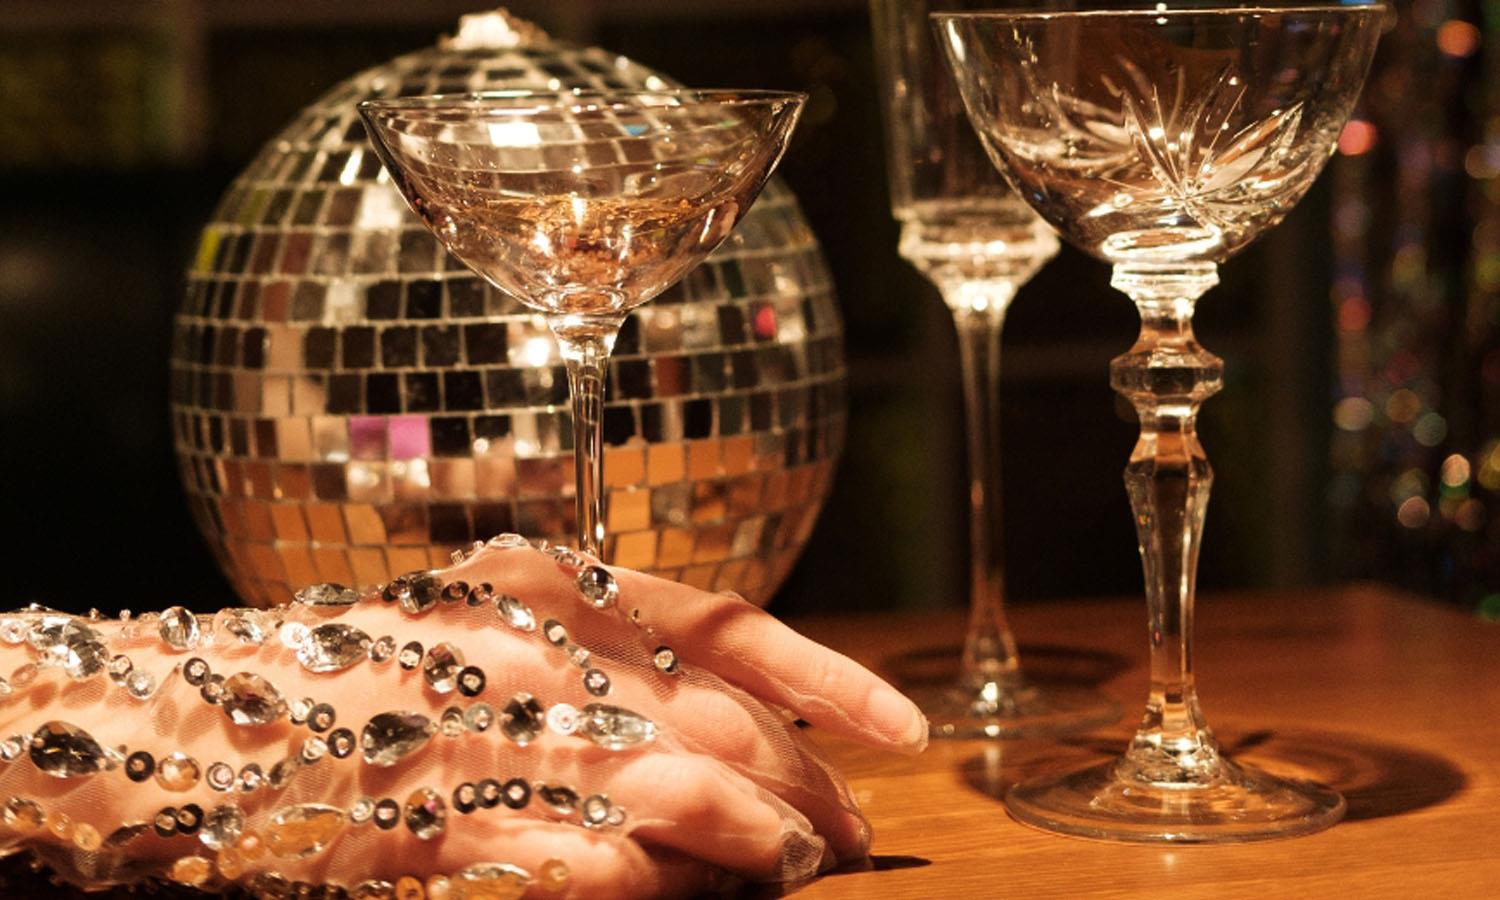 Woman's hand covered in jewels holding a glass on a table with a disco ball